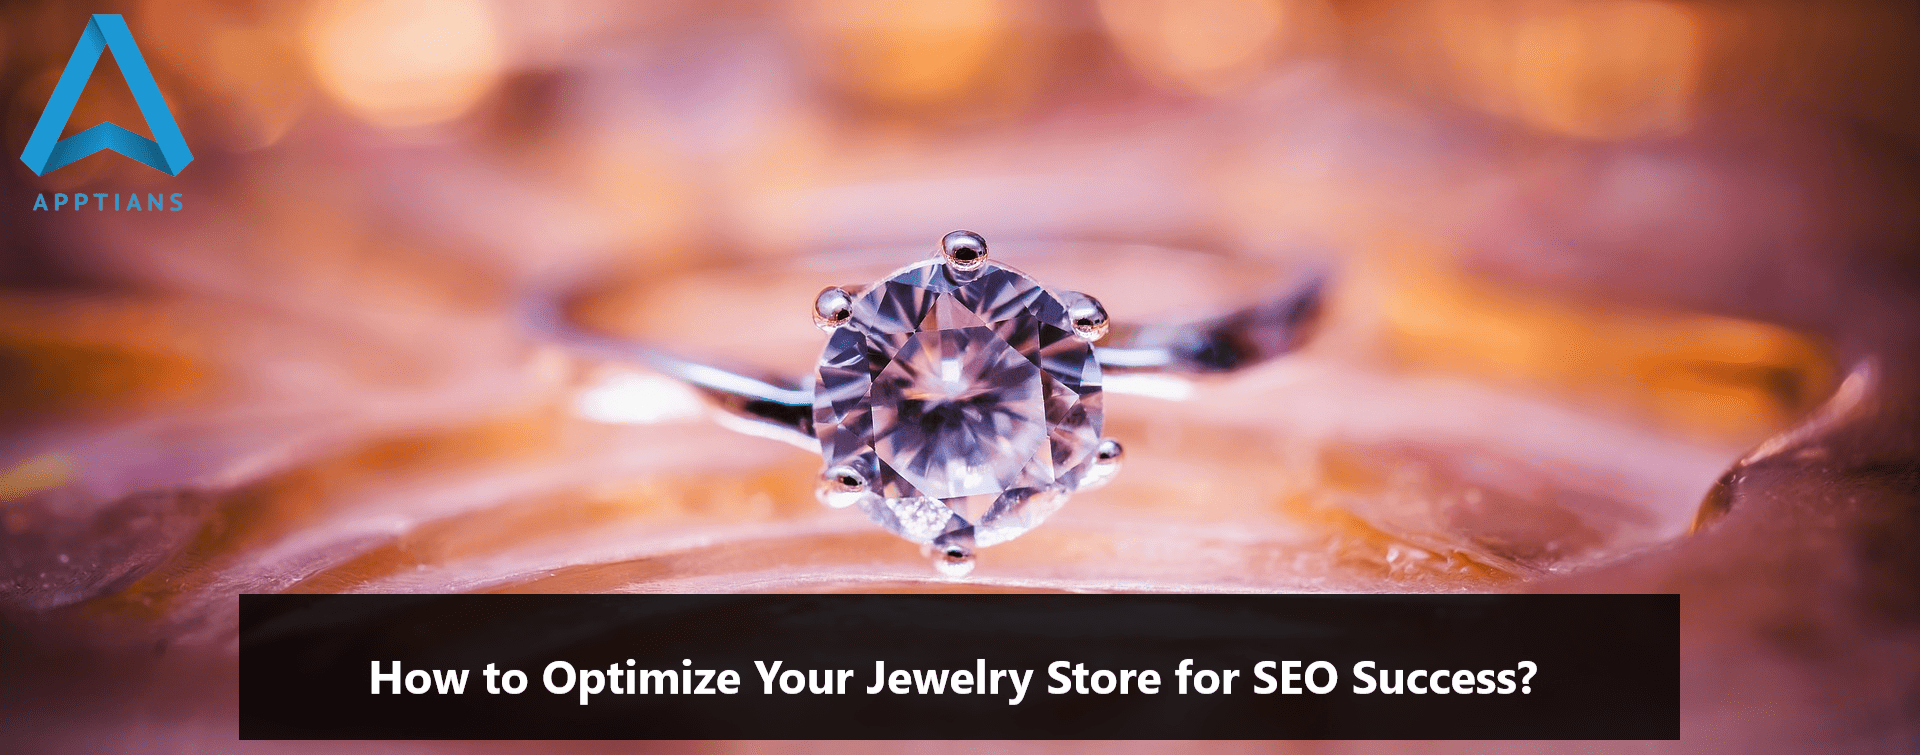 How to Optimize Your Jewelry Store for SEO Success